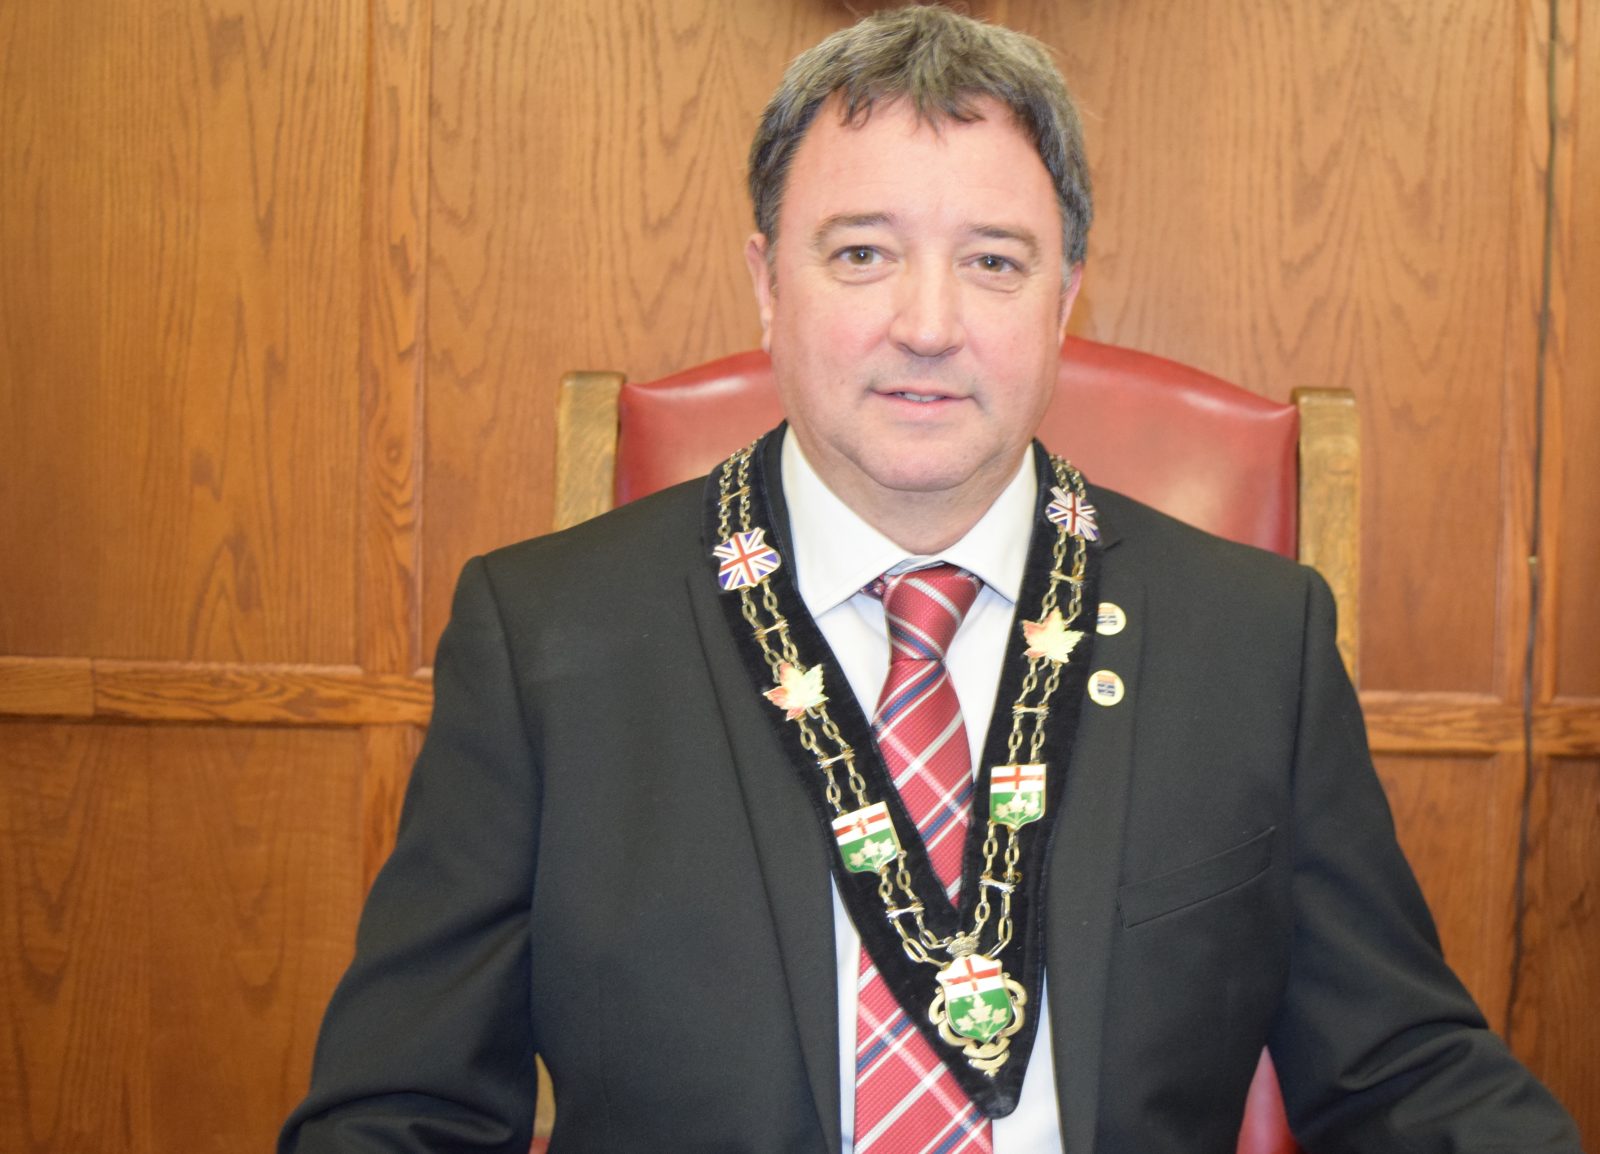 North Glengarry Mayor asks community to shop local